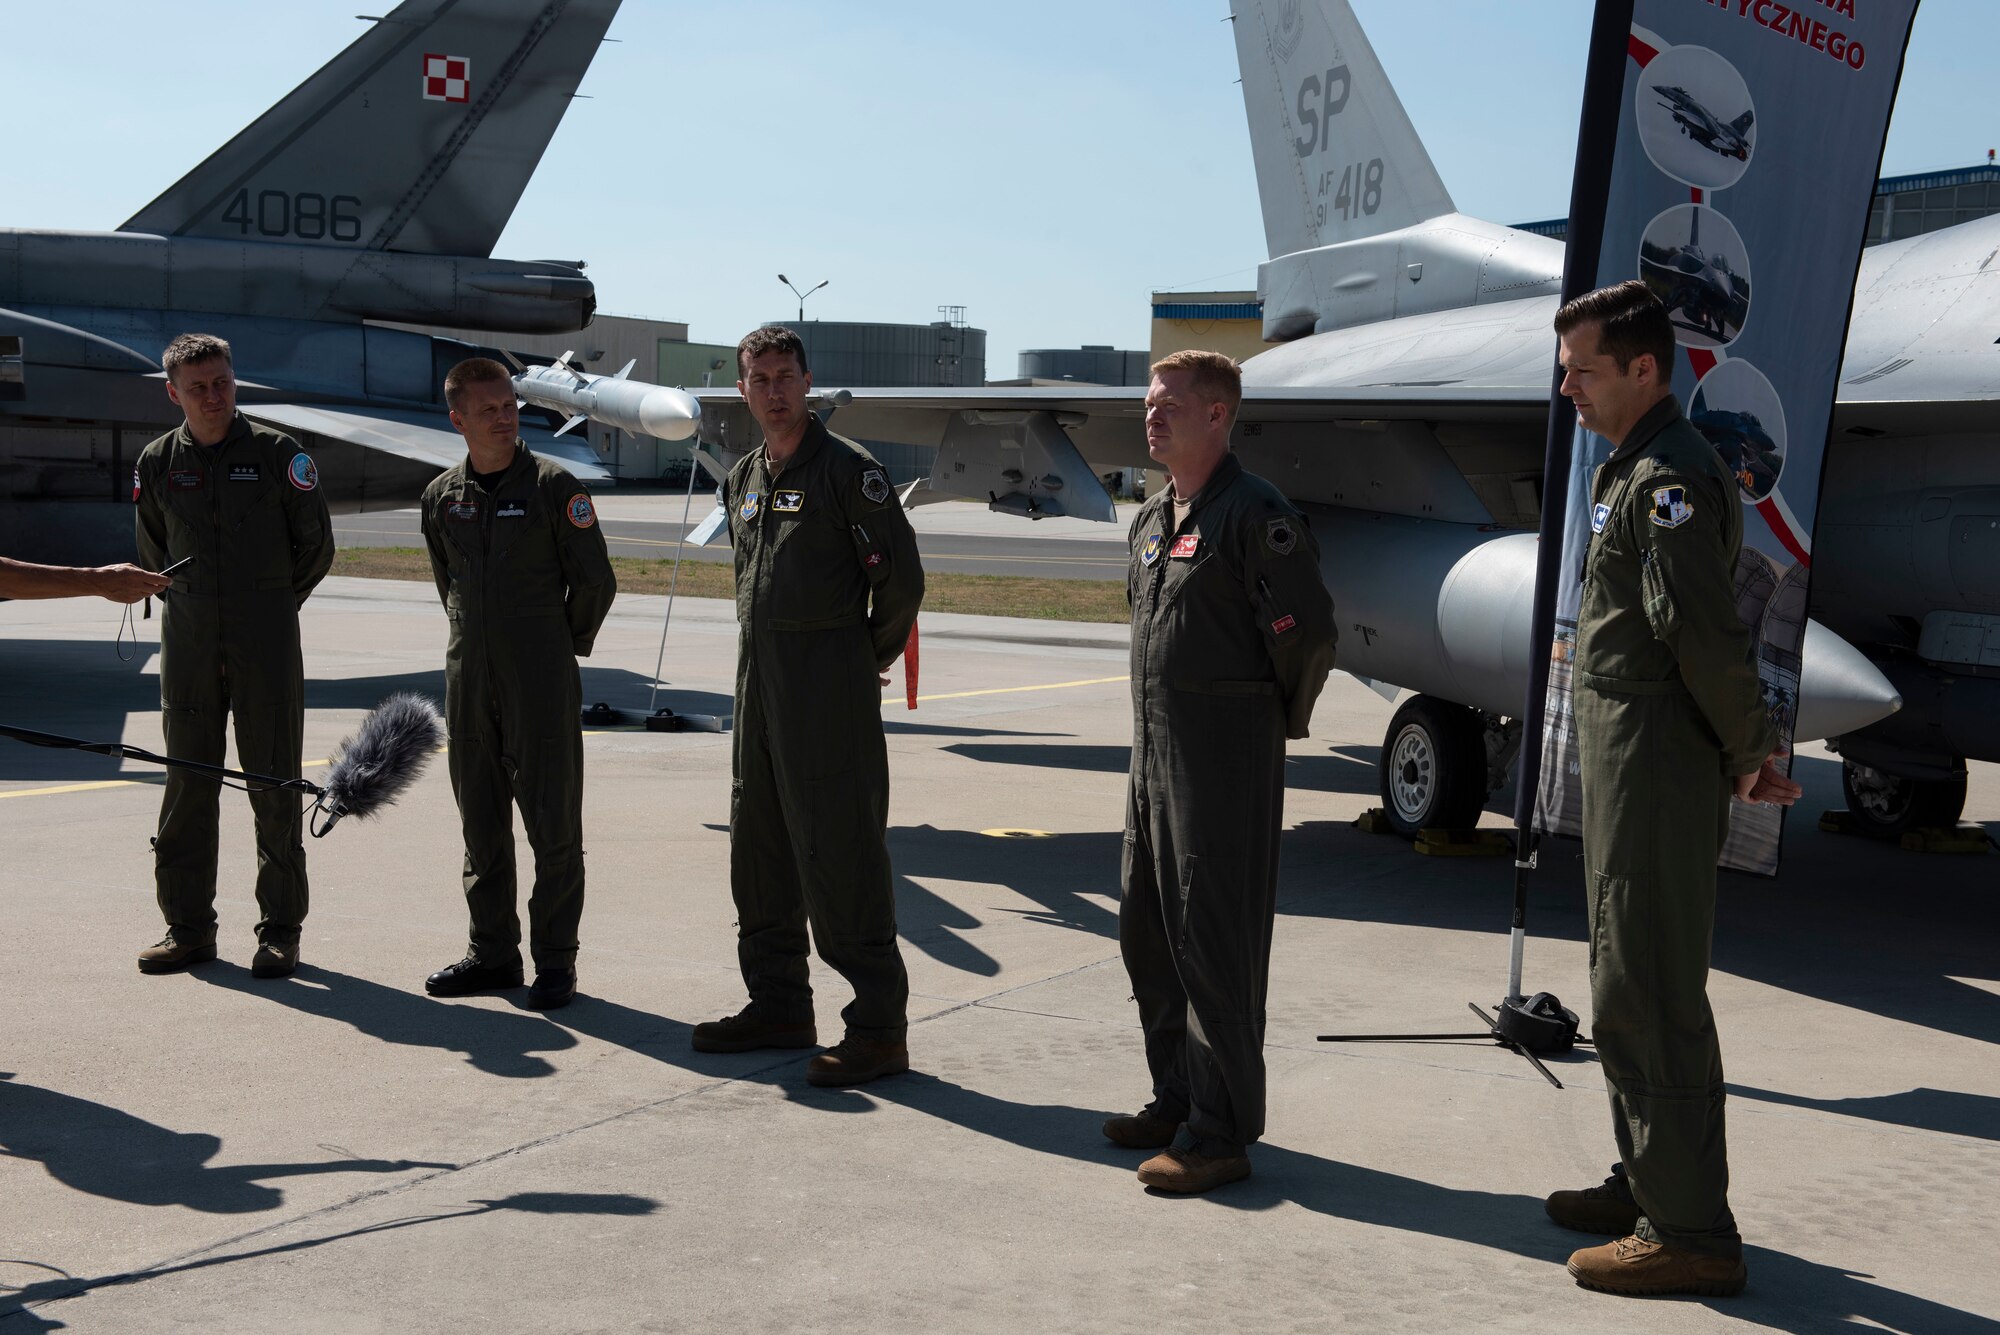 Starting far left, Polish Air Force Col. Tomasz Jatczak, 32nd Tactical Air Base commander, Brig. Gen. Iteneusz Nowak, 2nd Tactical Air Wing commander, U.S. Air Force Col. David Epperson, 52nd Fighter Wing commander, Lt. Col. Patrick Kennedy, 480th Expeditionary Fighter Squadron commander, and Lt. Col. Albert Roper, 52nd Operations Group Detachment One commander, stand in front of a static display for brief interviews at Łask AB, Poland, August 21, 2020. By meeting together, leadership from the Polish and U.S. forces participating in the ongoing Aviation Detachment Rotation were able to exchange perspectives, develop friendships, and enhance the partnership between the two countries. (U.S. Air Force photo by Senior Airman Melody W. Howley)